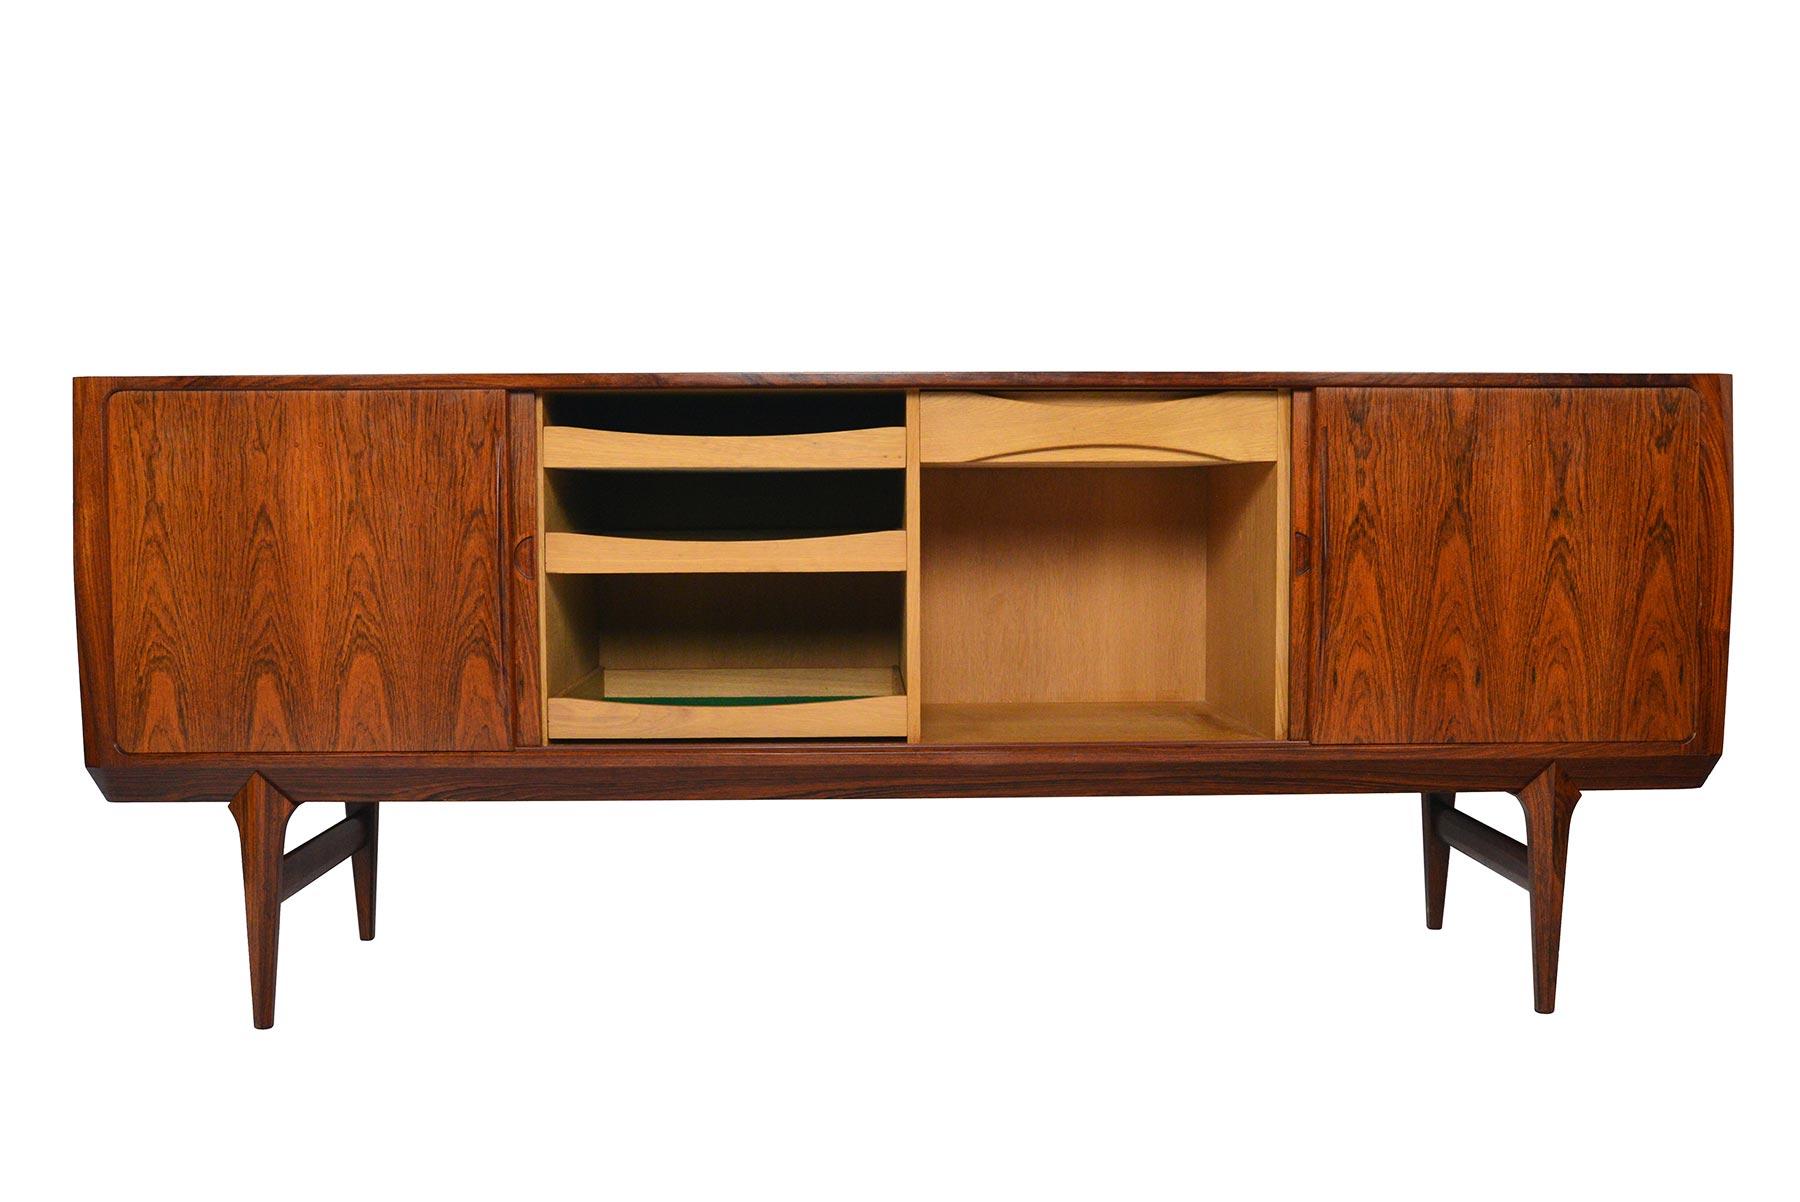 The genius is in the details with this magnificent Model 10 Danish modern sliding door credenza. Designed by Johannes Andersen for Hans Bech in 1961, and crafted in dramatic Brazilian rosewood, this rare design is unlike any other credenza that has